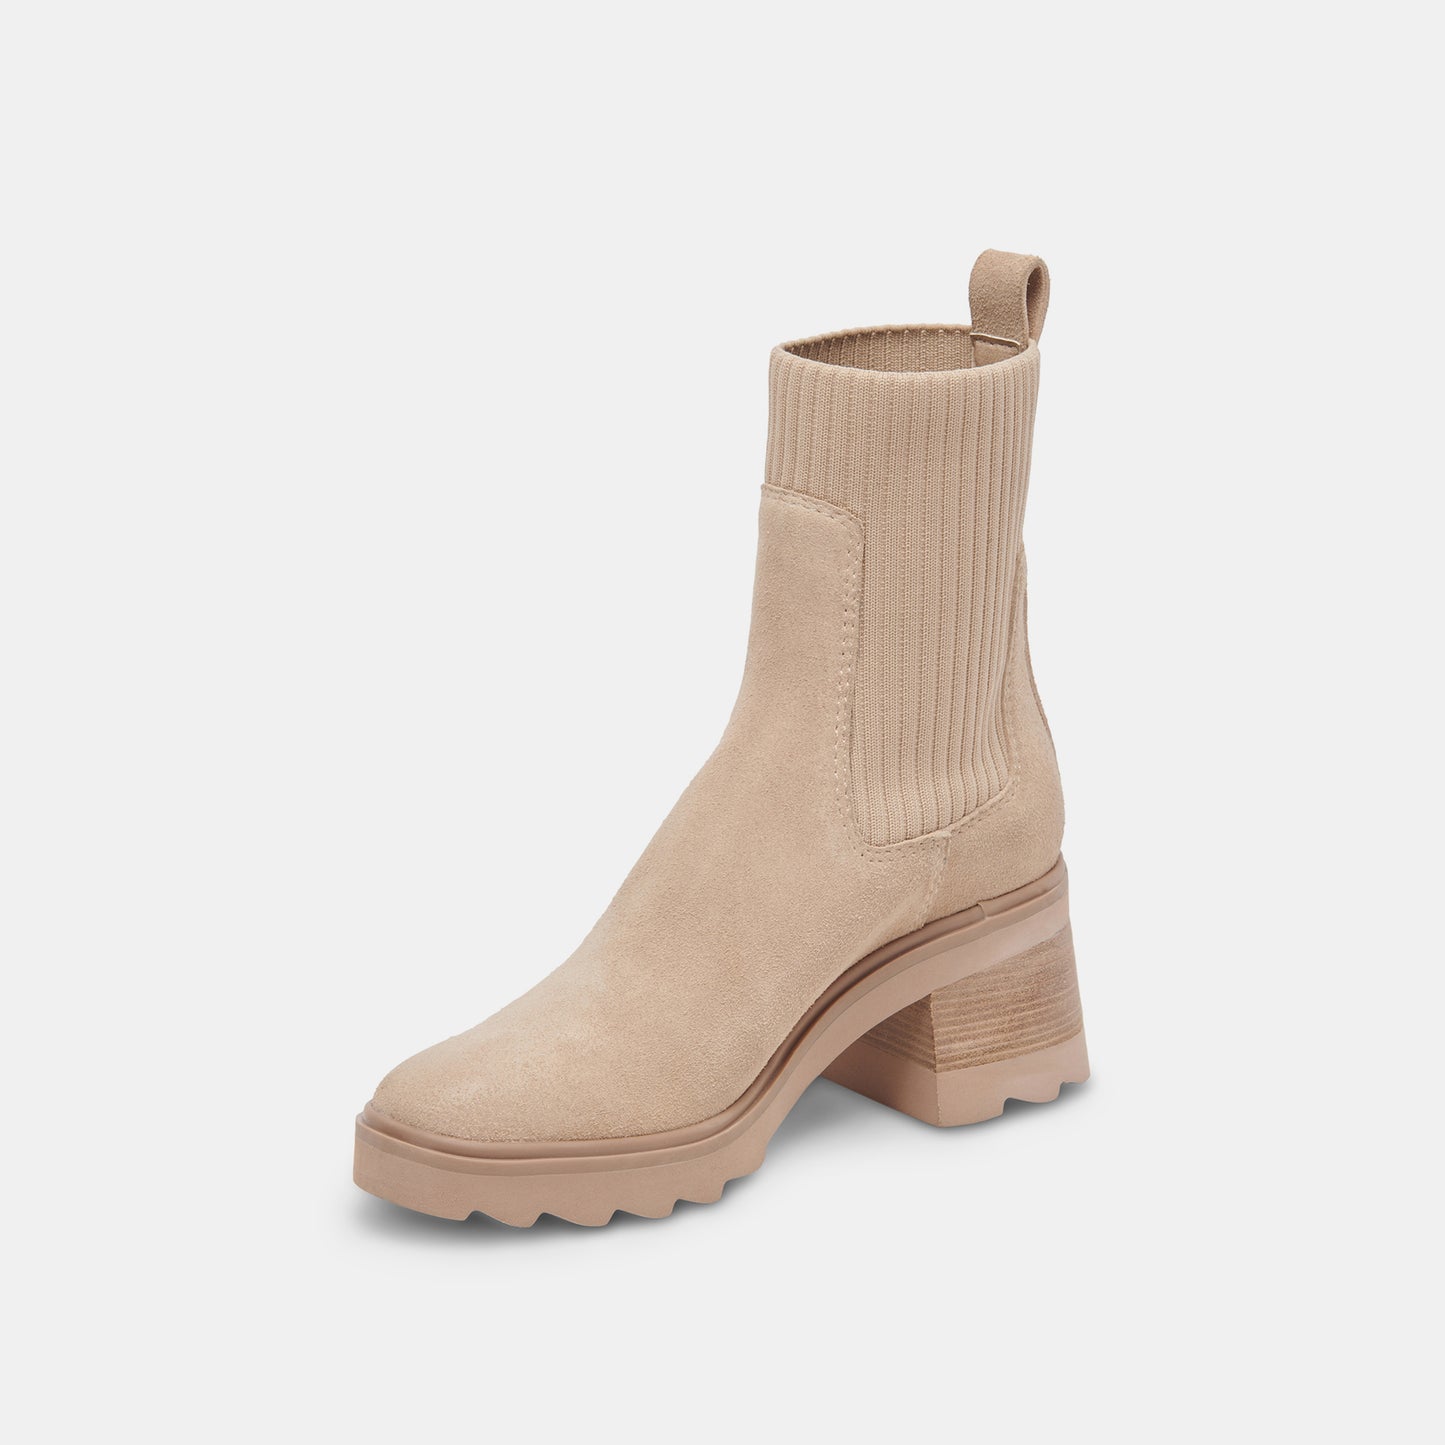 MOSIMO BOOTS DUNE SUEDE